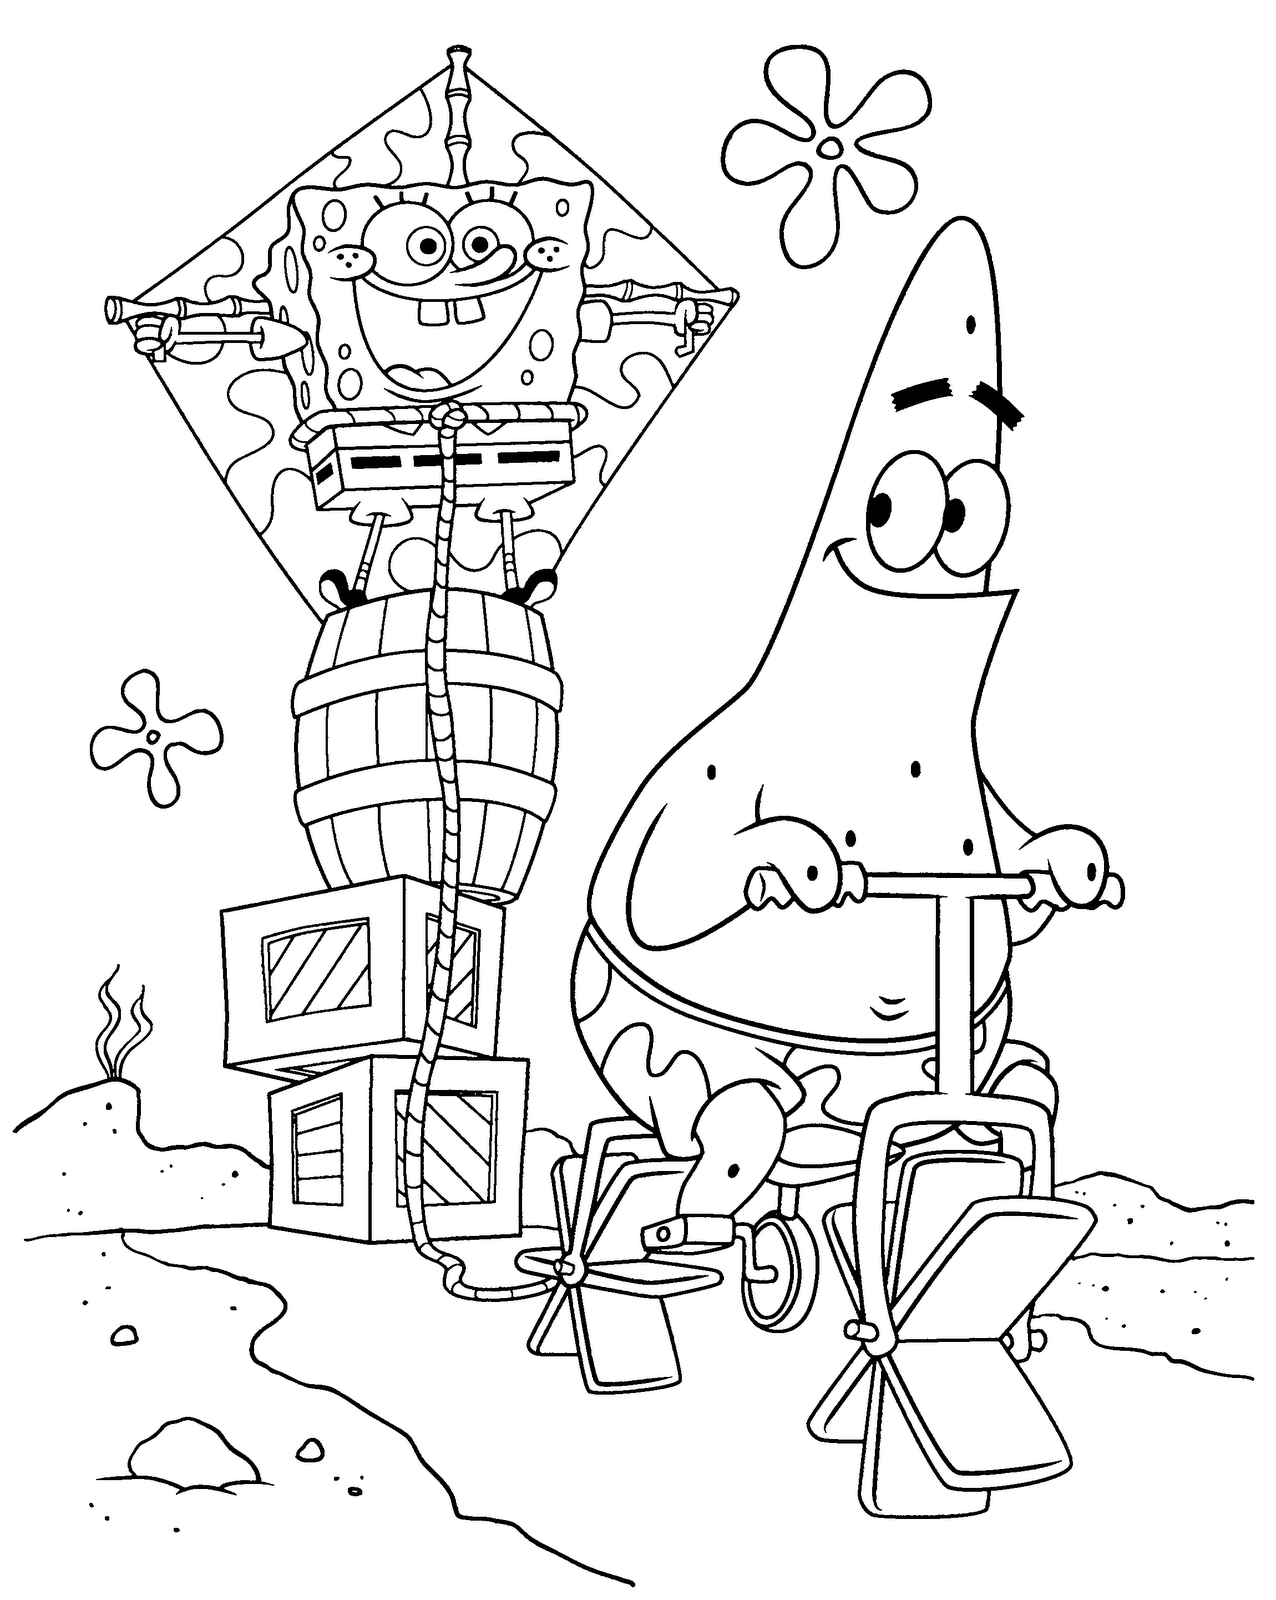 Funny Spongebob Coloring Pages Printables 94